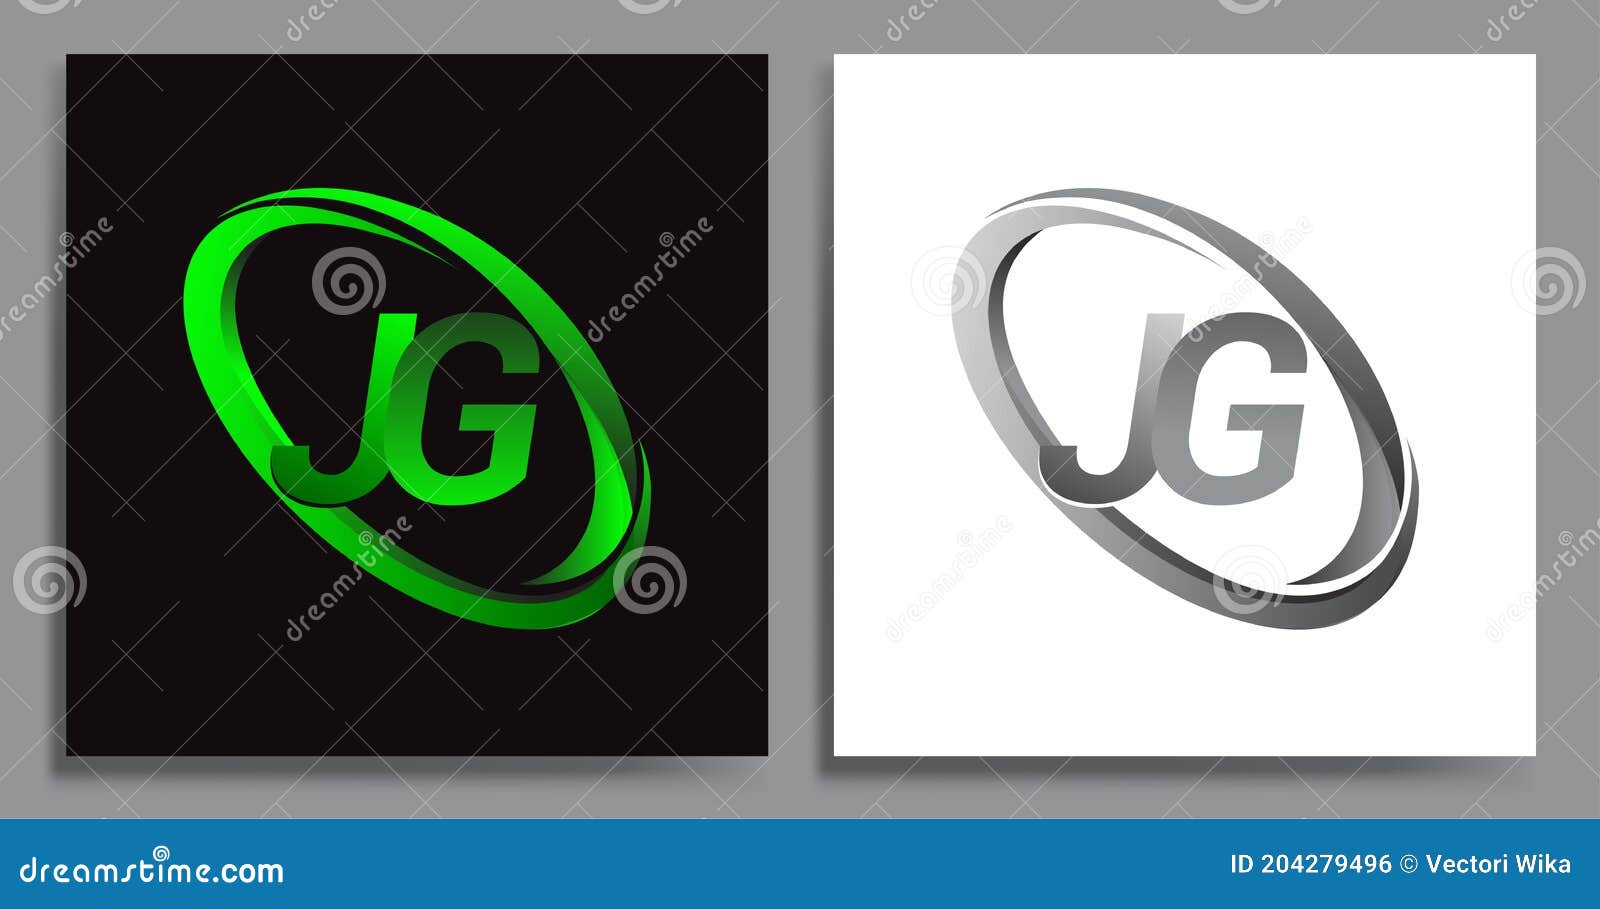 Letter Jg Logotype Design For Company Name Colored Green Swoosh And Grey Vector Set Logo Design For Business And Company Identity Stock Vector Illustration Of Capital Estate